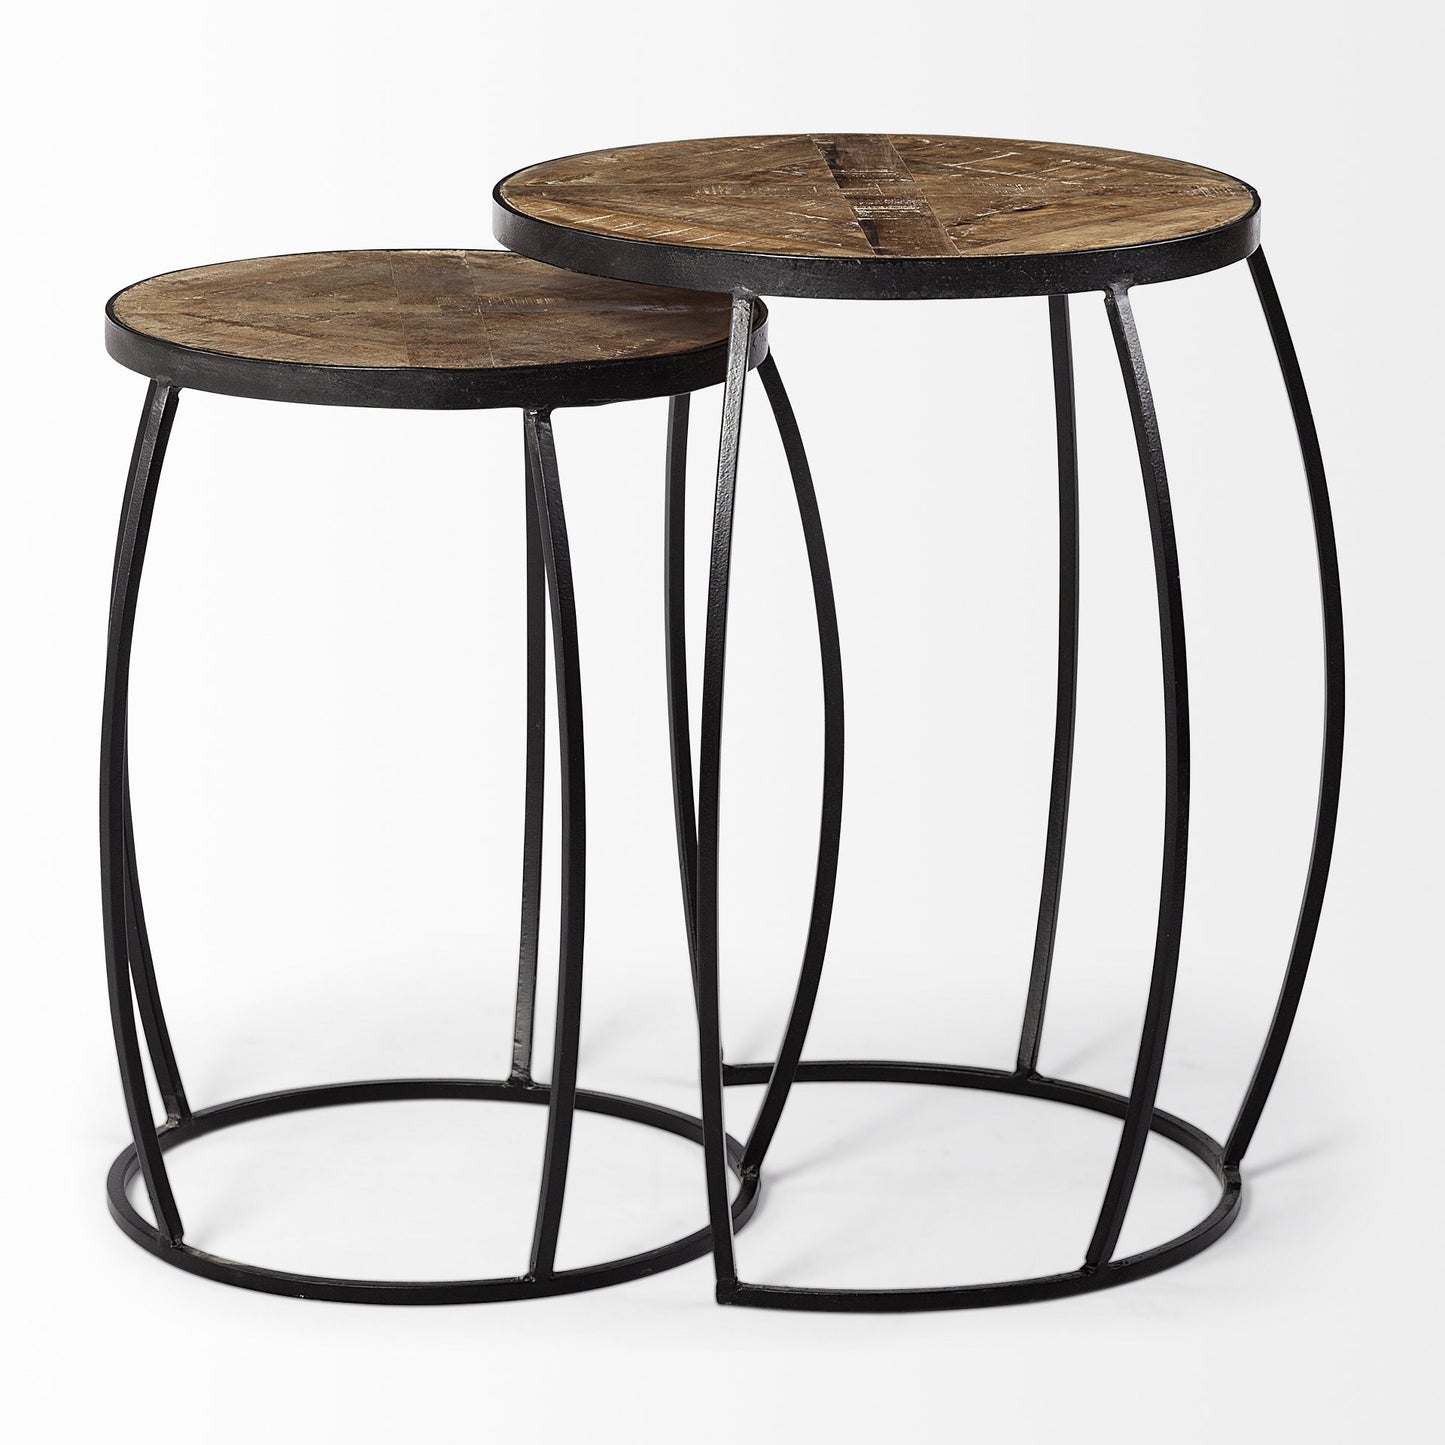 Set of 2 Brown Wooden Round Top Accent Tables with Black Metal Frame Nesting By Homeroots